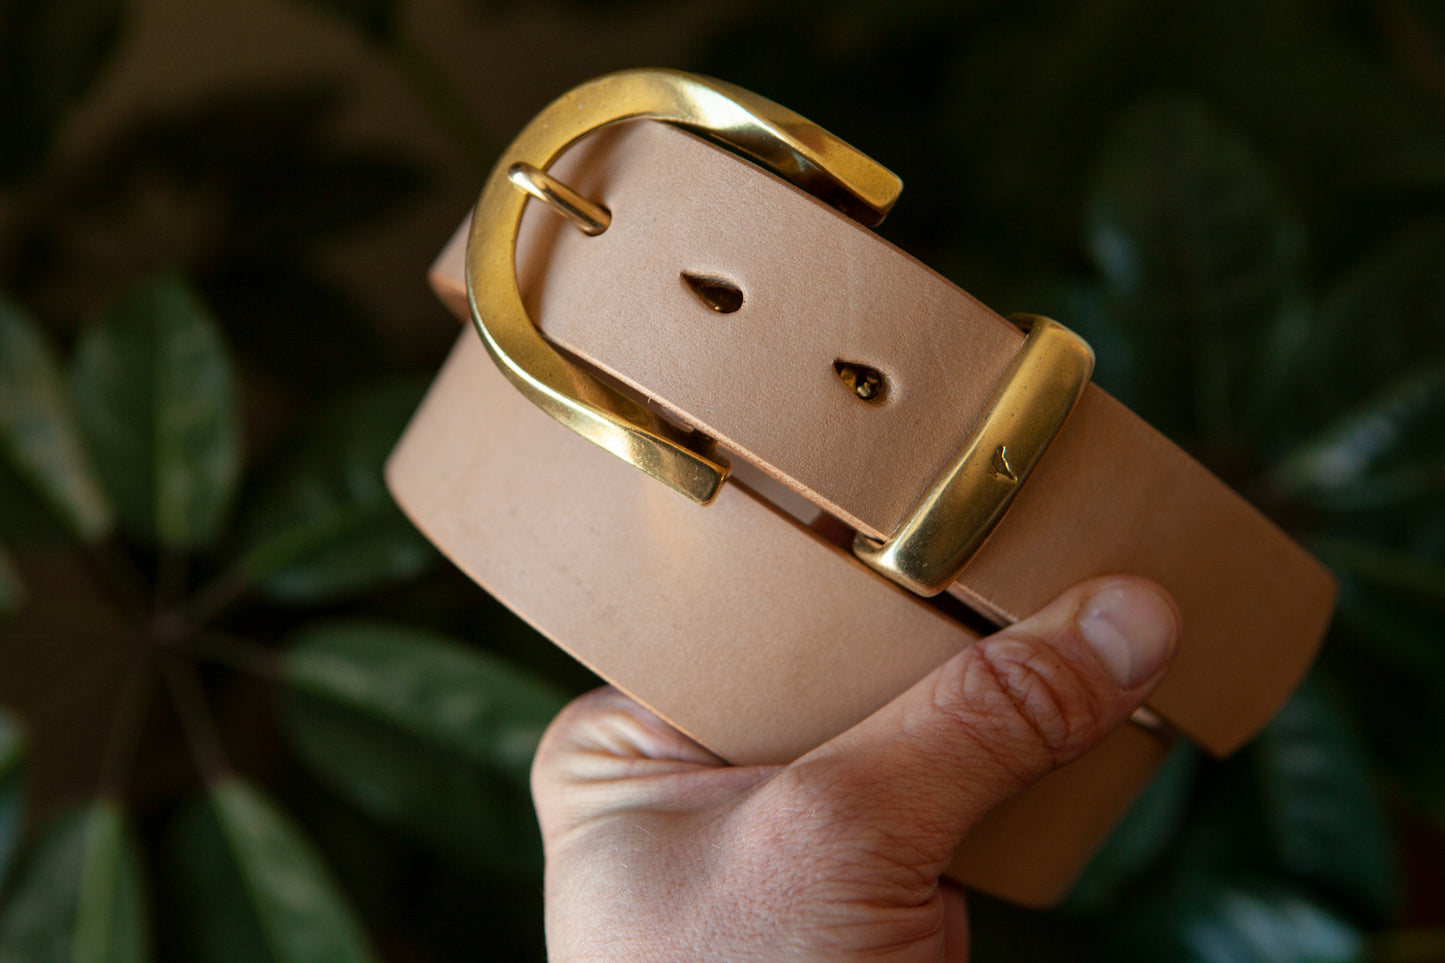 1.5" Brass Japanese Twist Belt - You choose the leather!